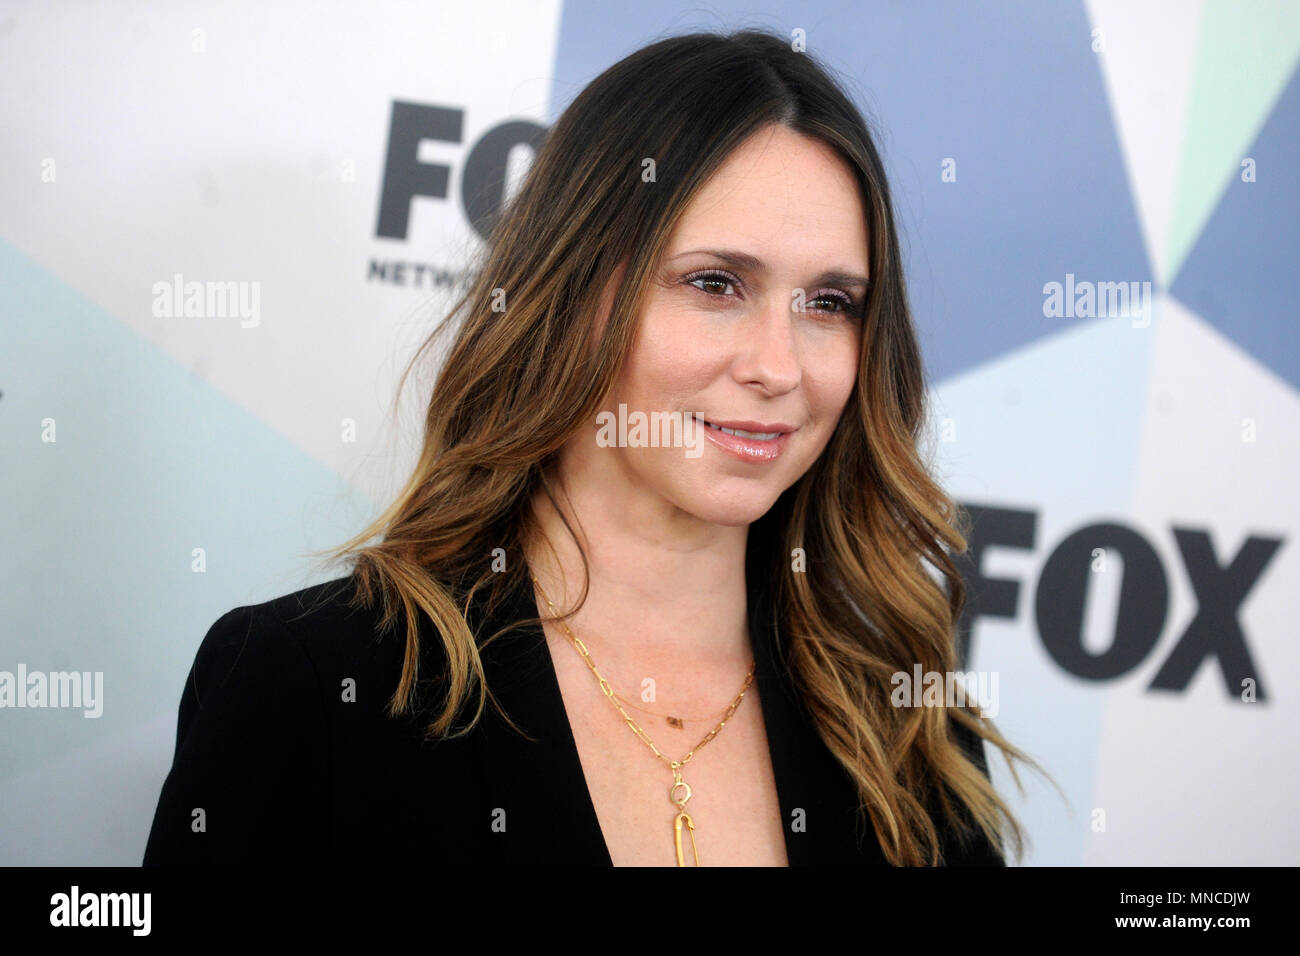 Jennifer Love Hewitt attends 2018 Fox Network Upfront at Wollman Rink, Central Park on May 14, 2018 in New York City. Stock Photo